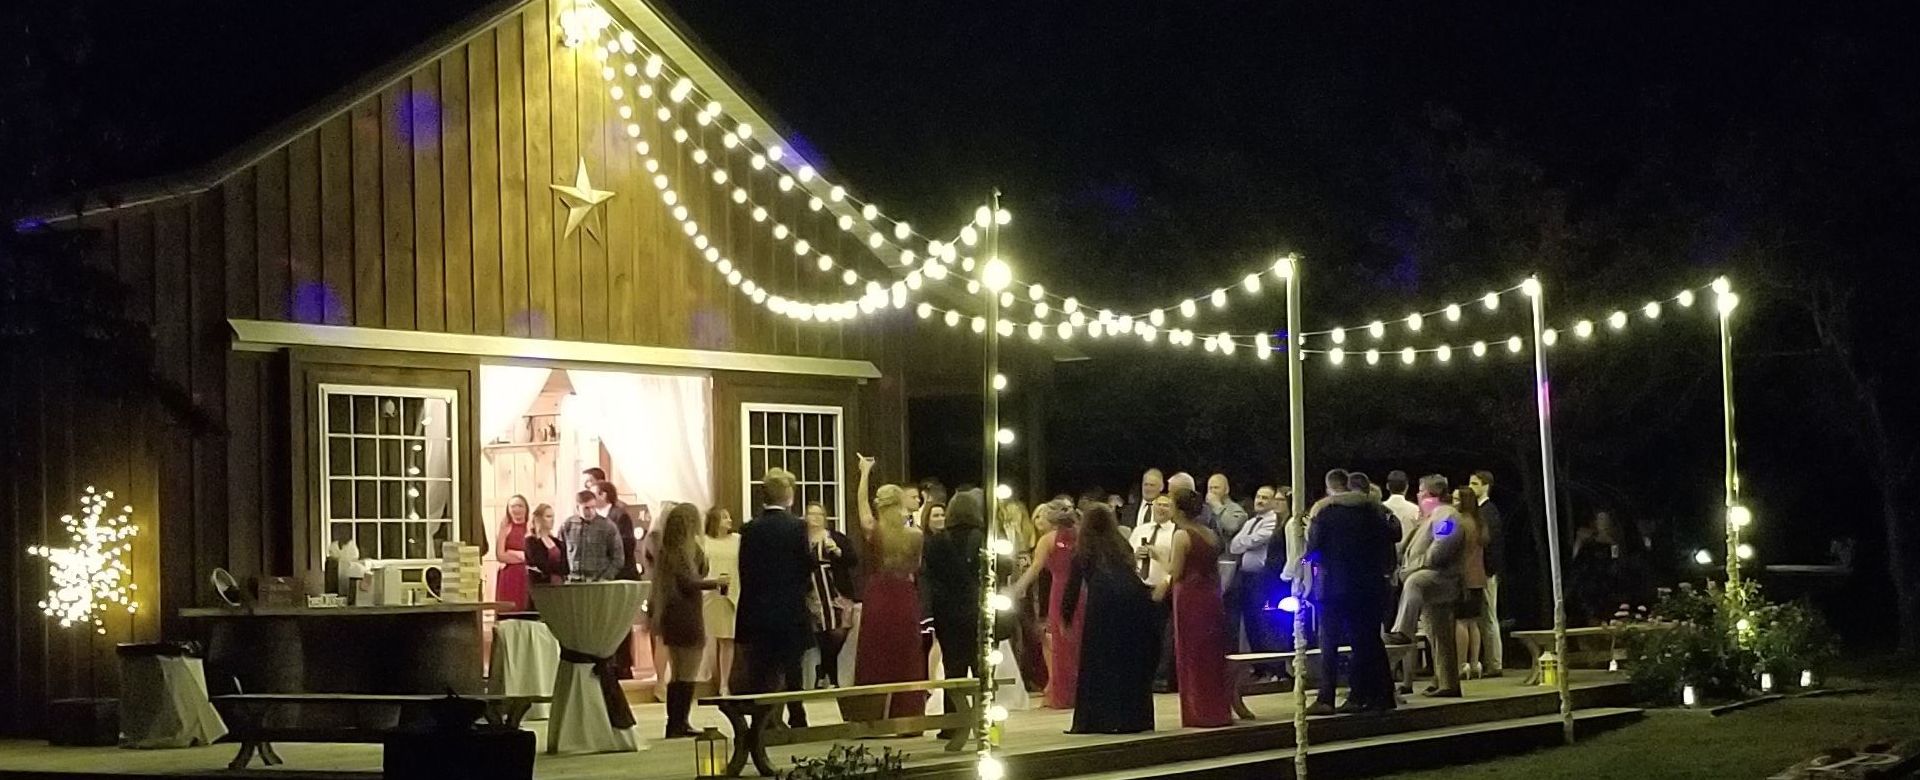 Wedding reception at night time. Bistro lights are strung from the barn to the deck.